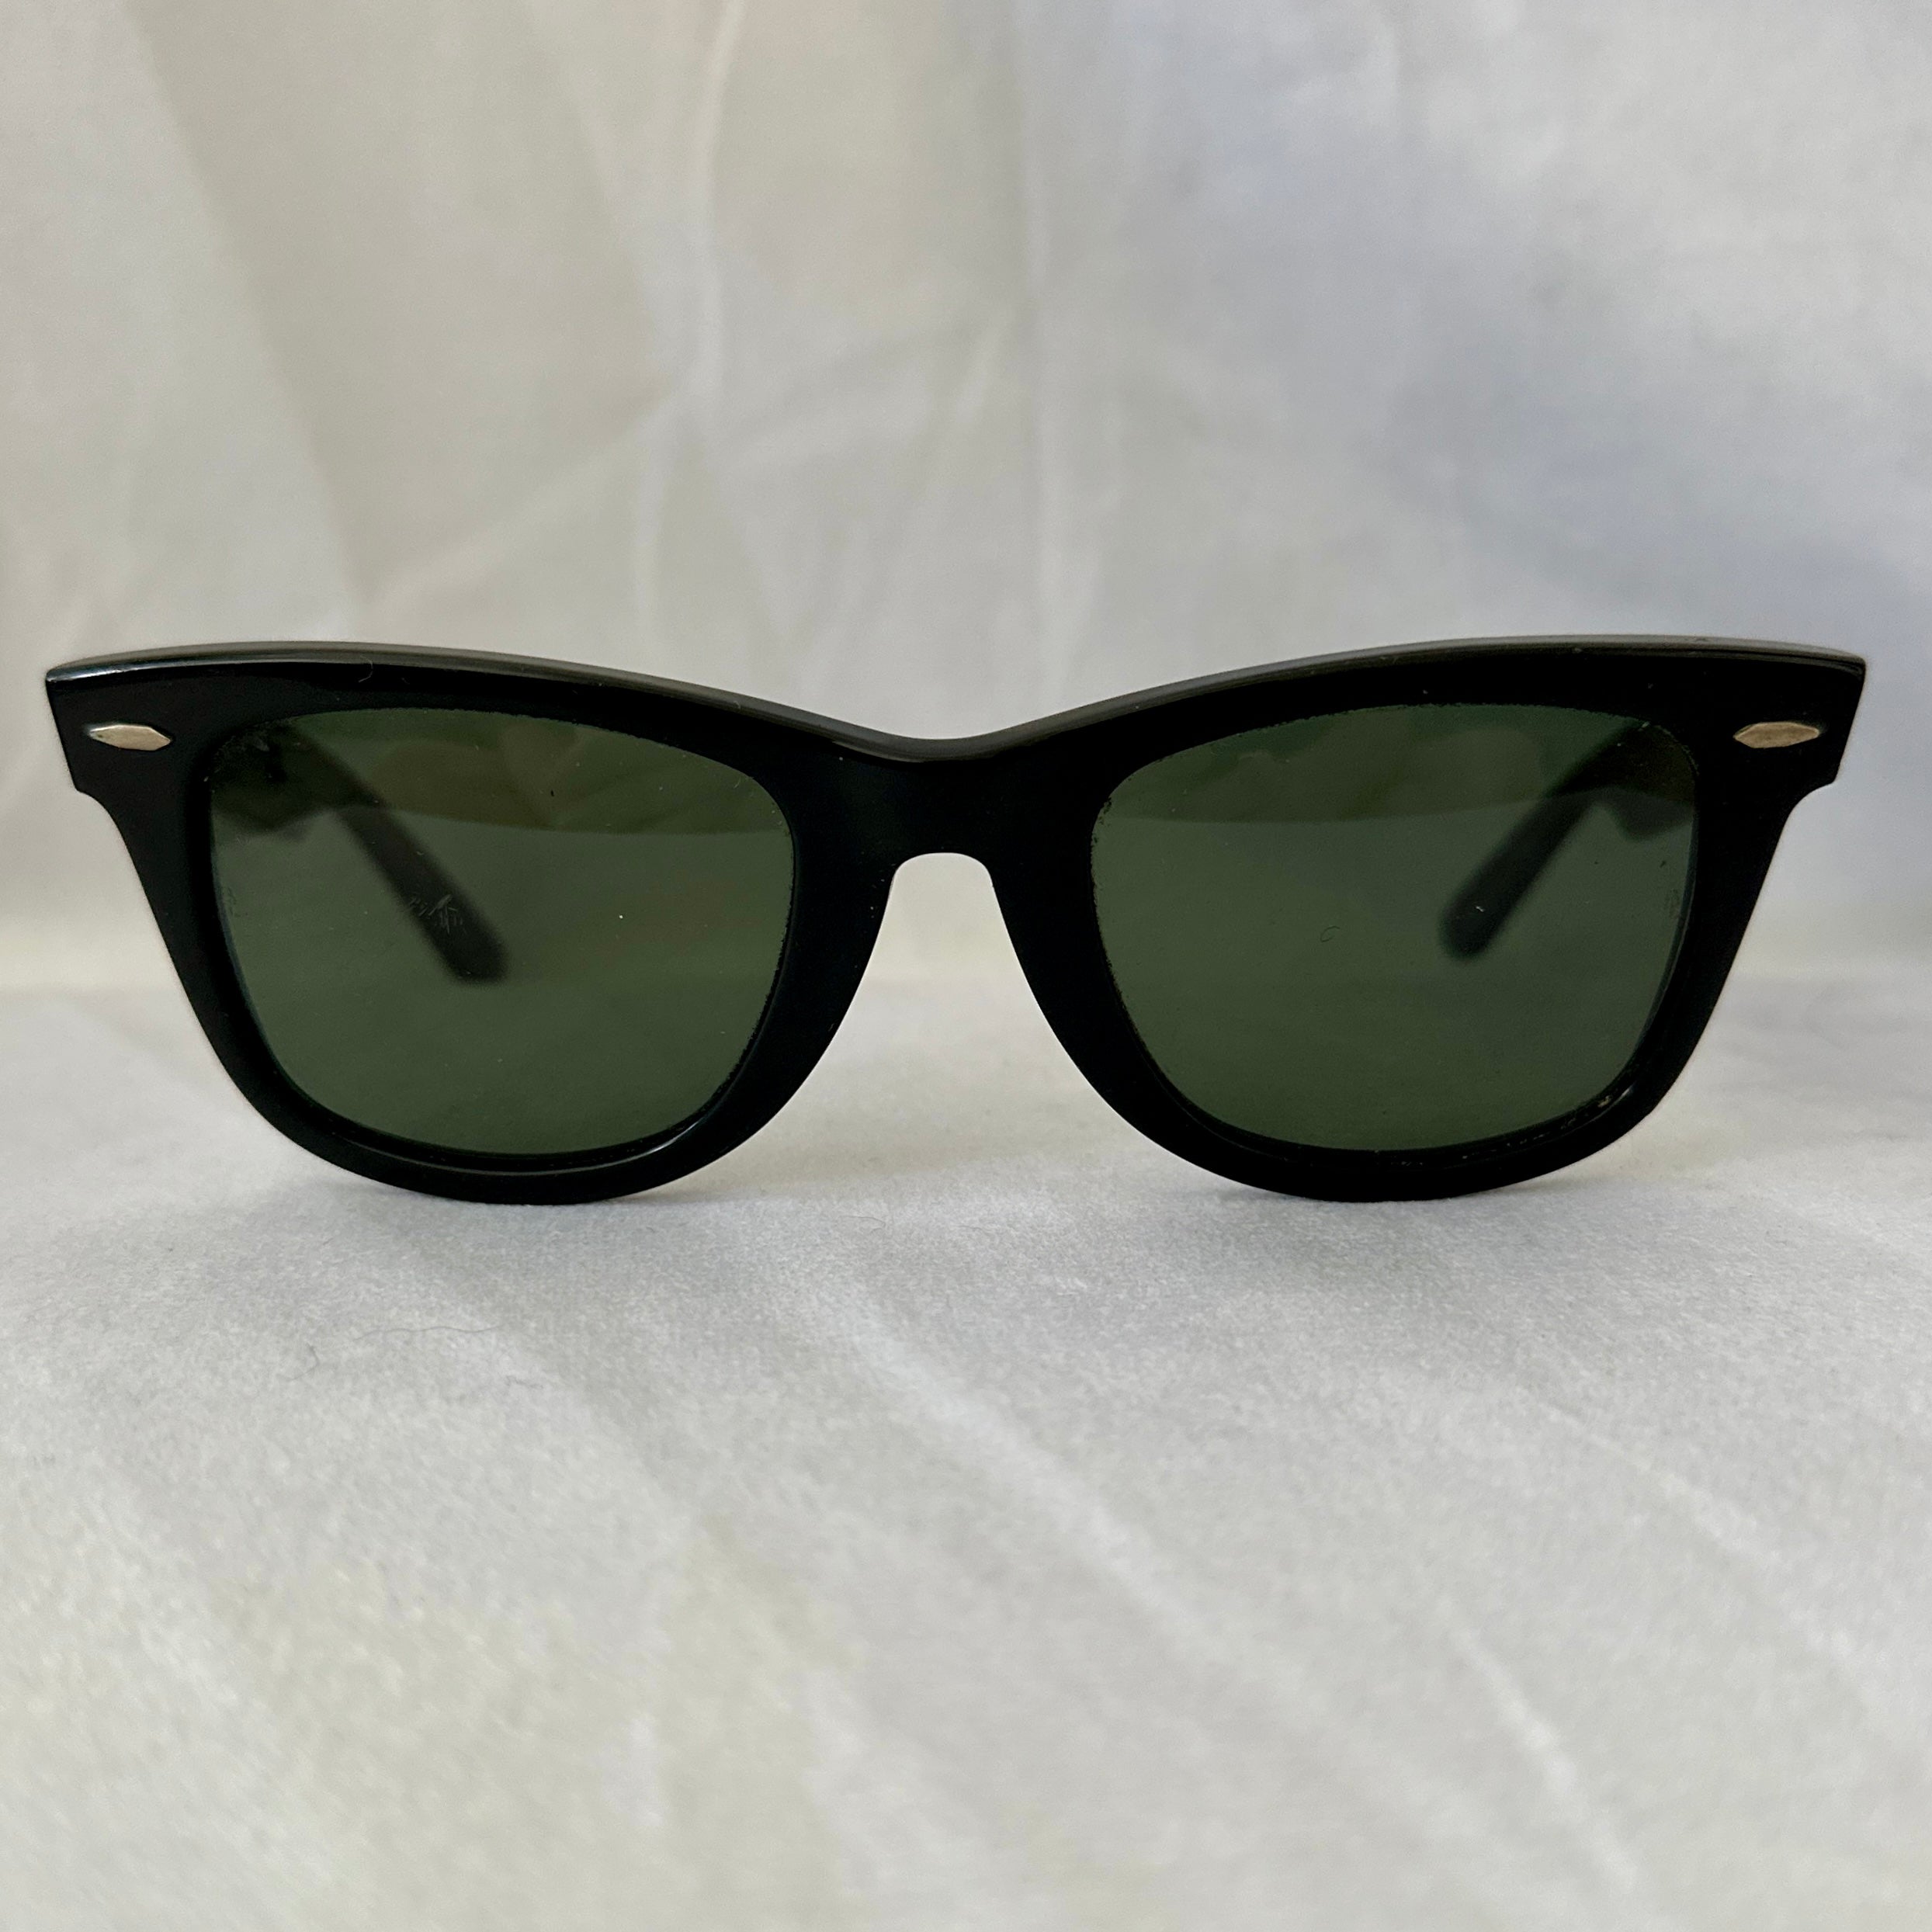 Ray Ban Wayfarer 5022- Vintage 80s Bausch & Lomb - Made in USA